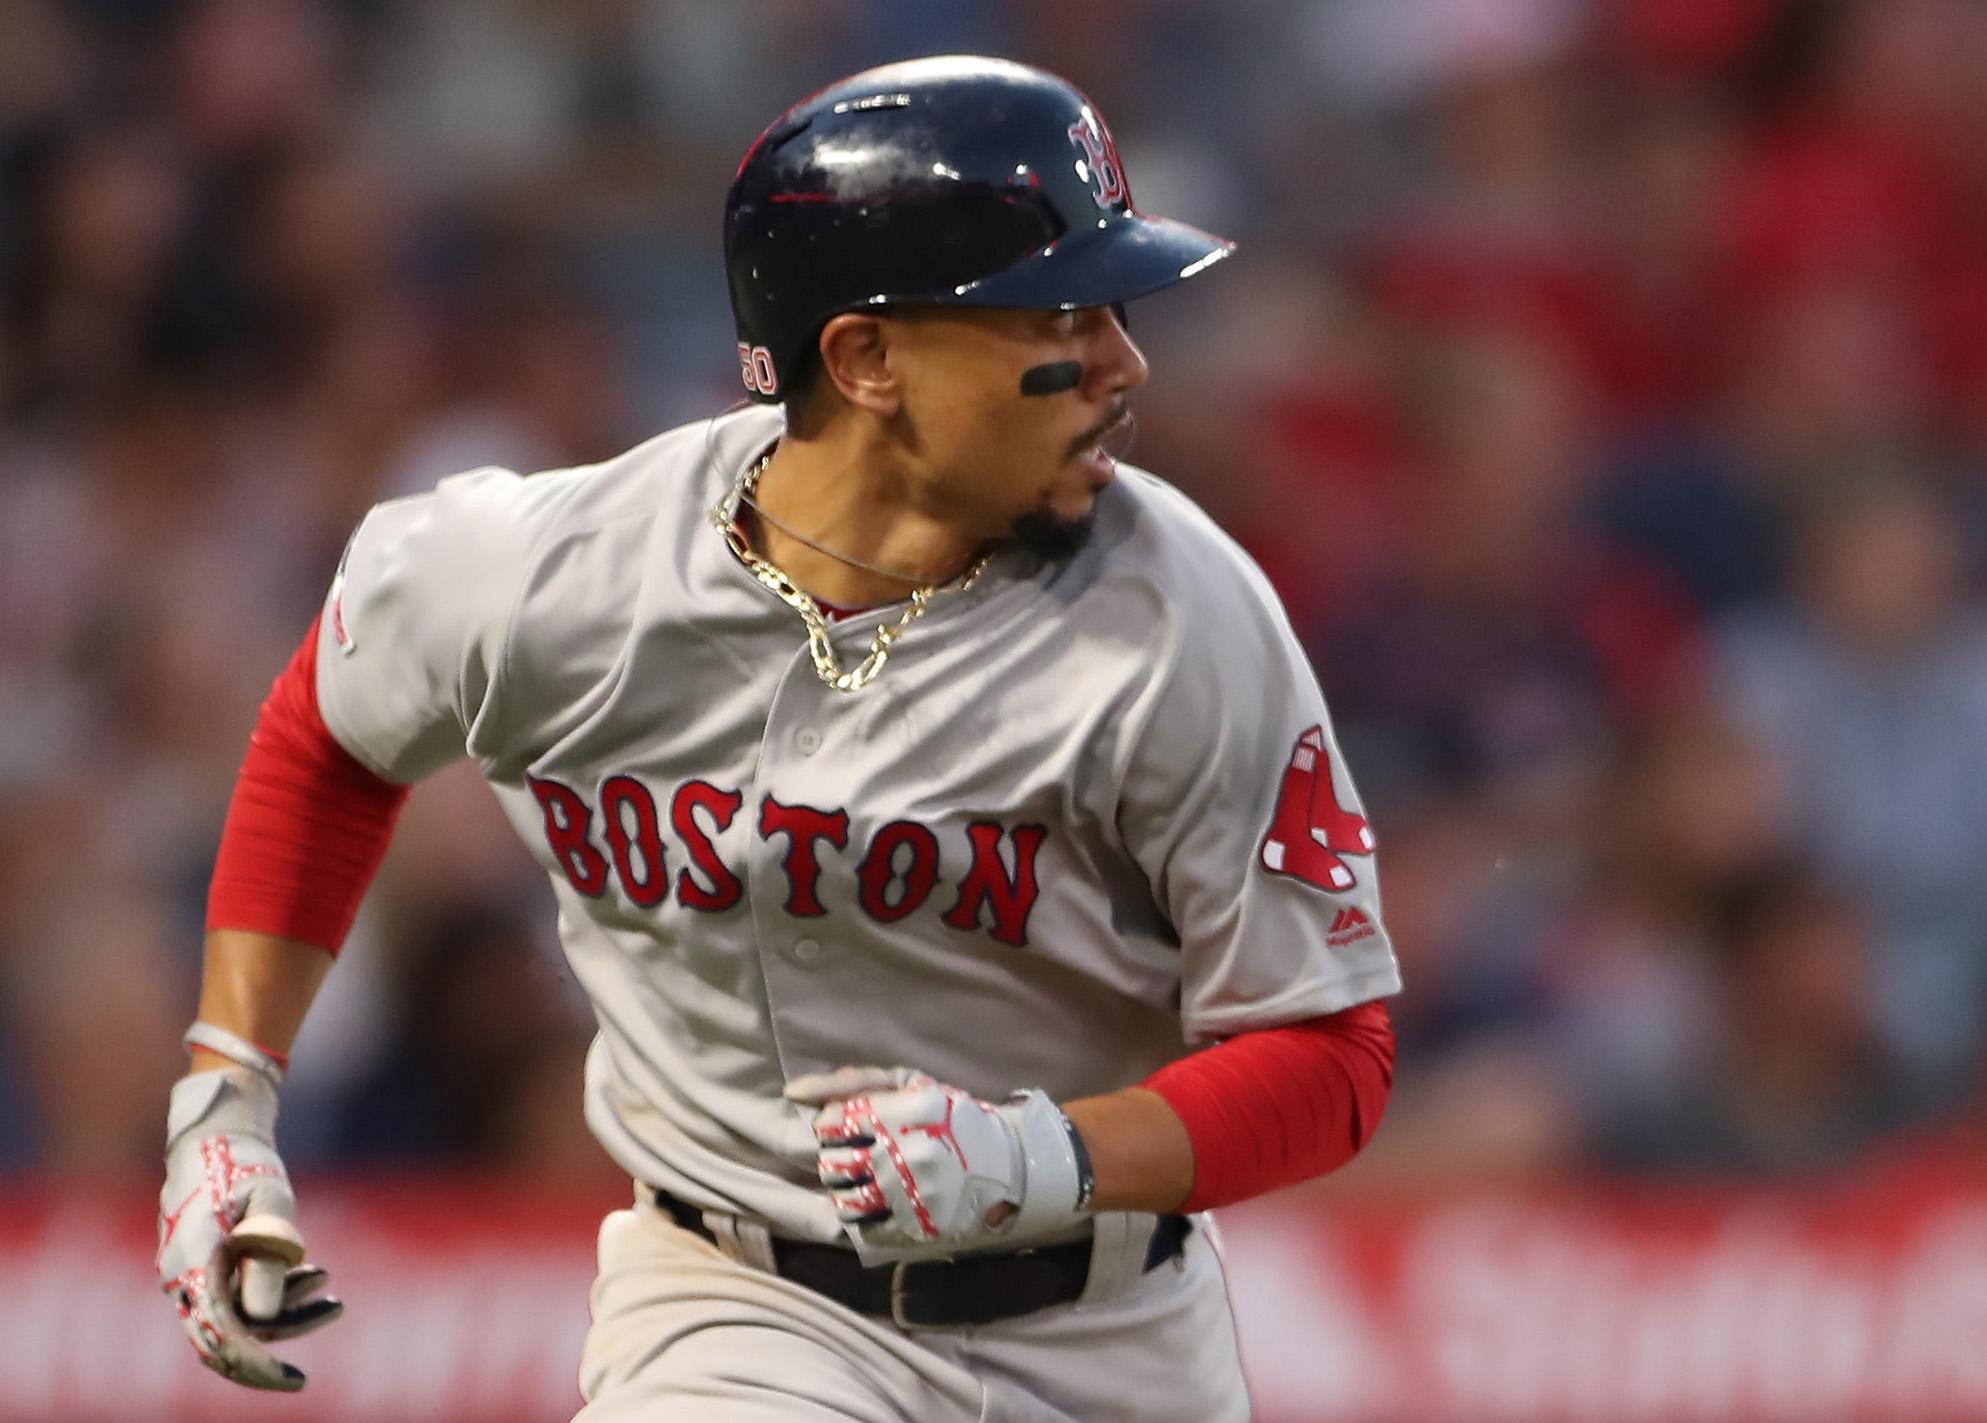 Boston Red Sox right fielder Mookie Betts (50) runs to first as he watches his hit during the game between the Boston Red Sox and the Los Angeles Angels at Angel Stadium on Aug. 31, 2019 in Anaheim, Calif. (Peter Joneleit/CSM/Zuma Press/TNS)